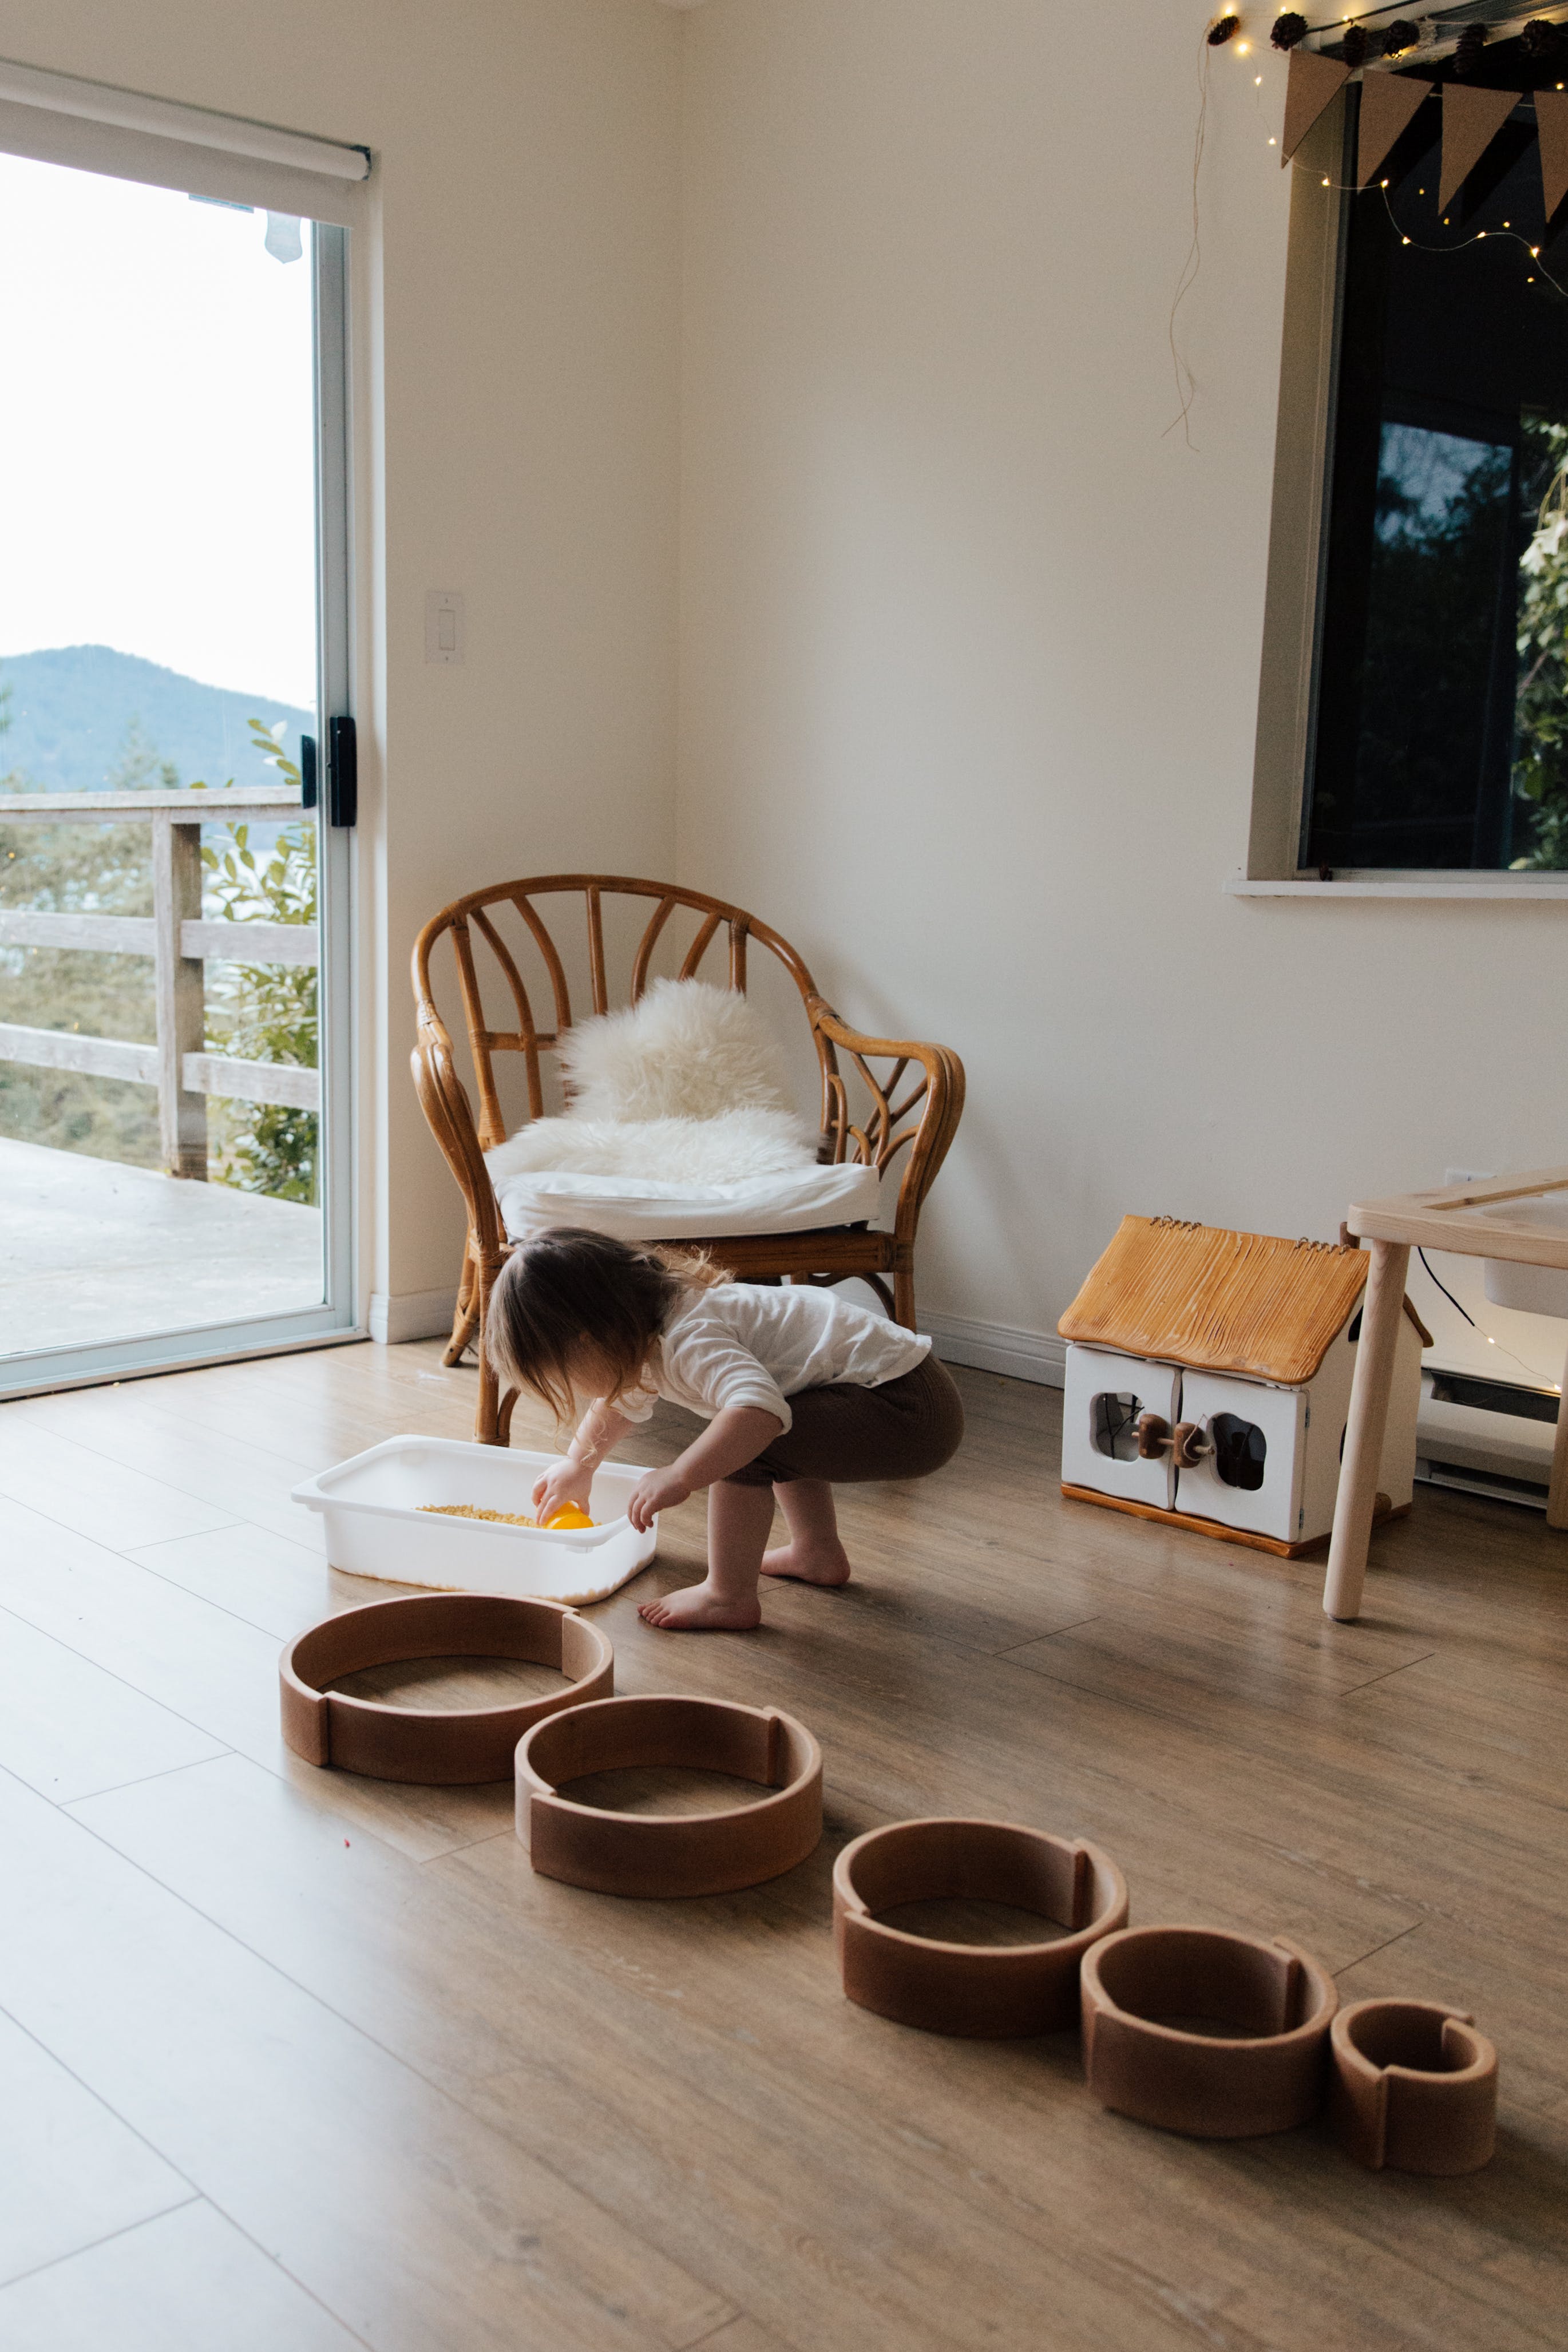 Montessori Schoolhouse Nurturing Children to Become Independent Learners